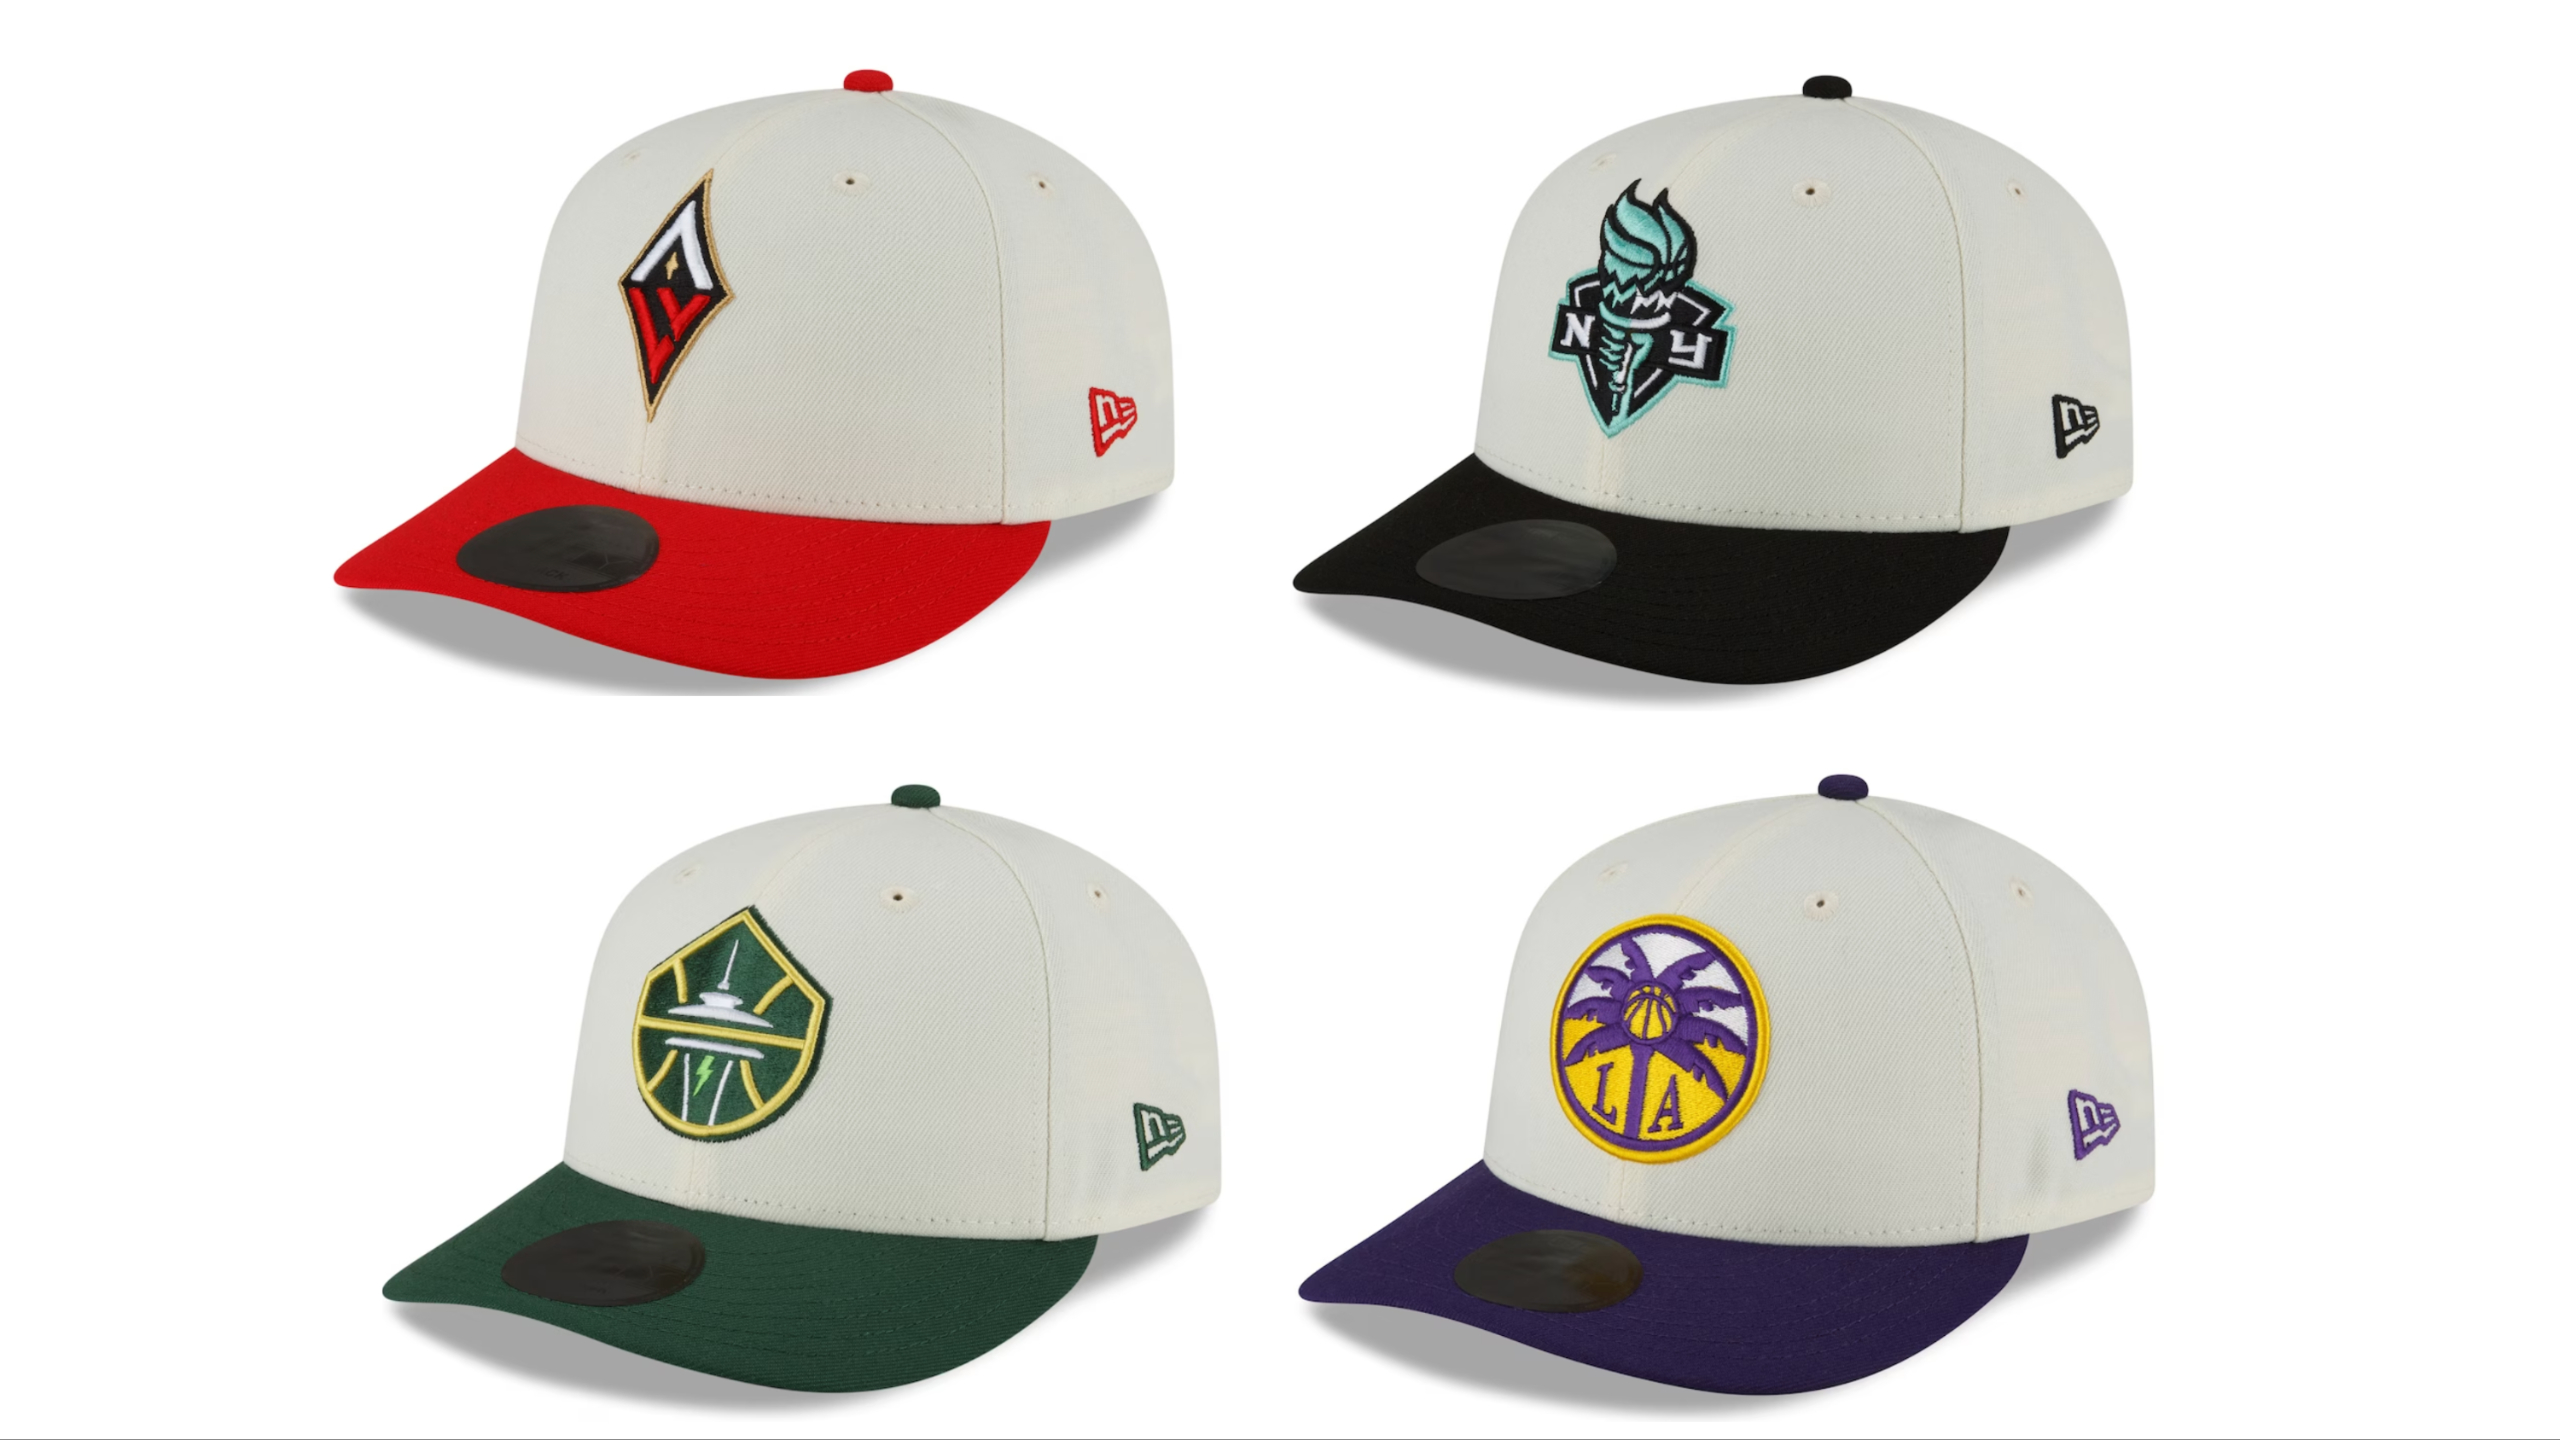 WNBA draft hats on sale: Where to get your Las Vegas Aces, New